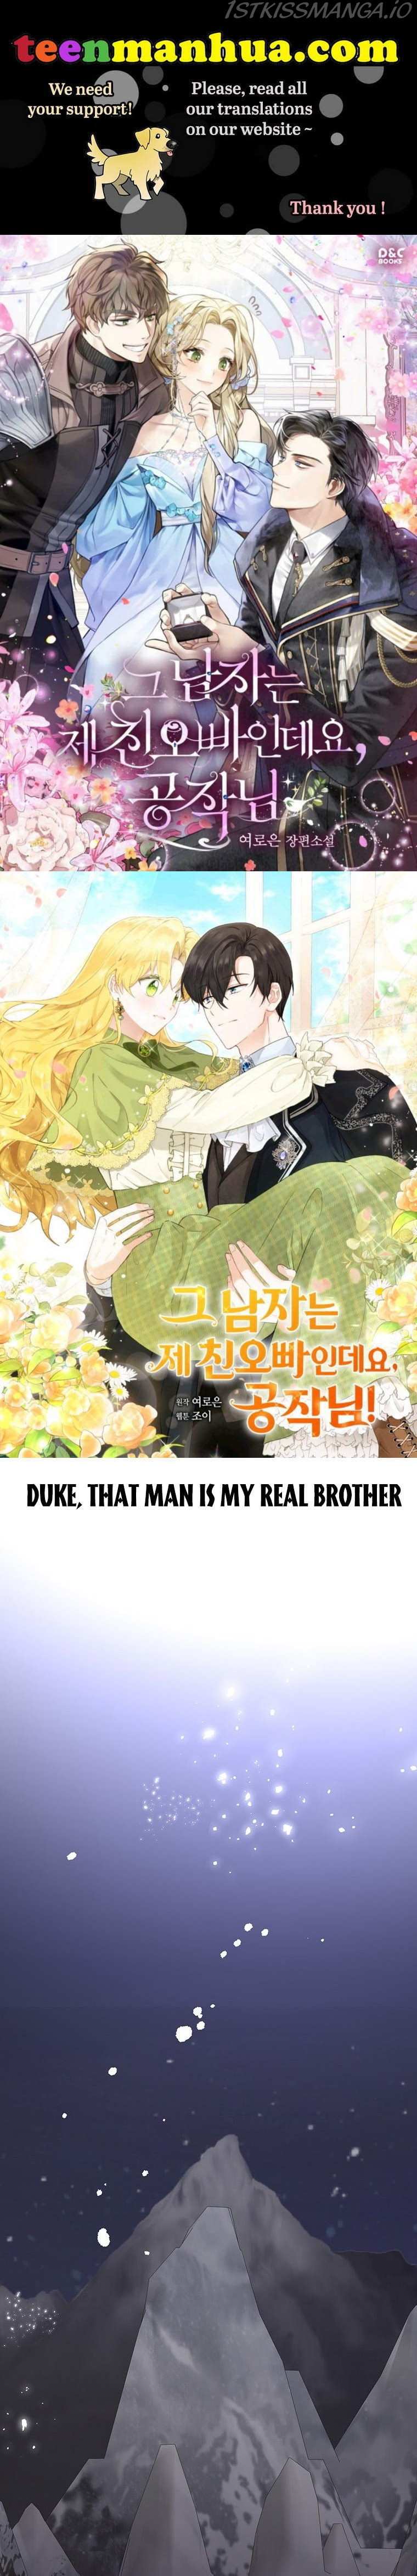 He’s My Real Brother, Duke Chapter 23 - page 2